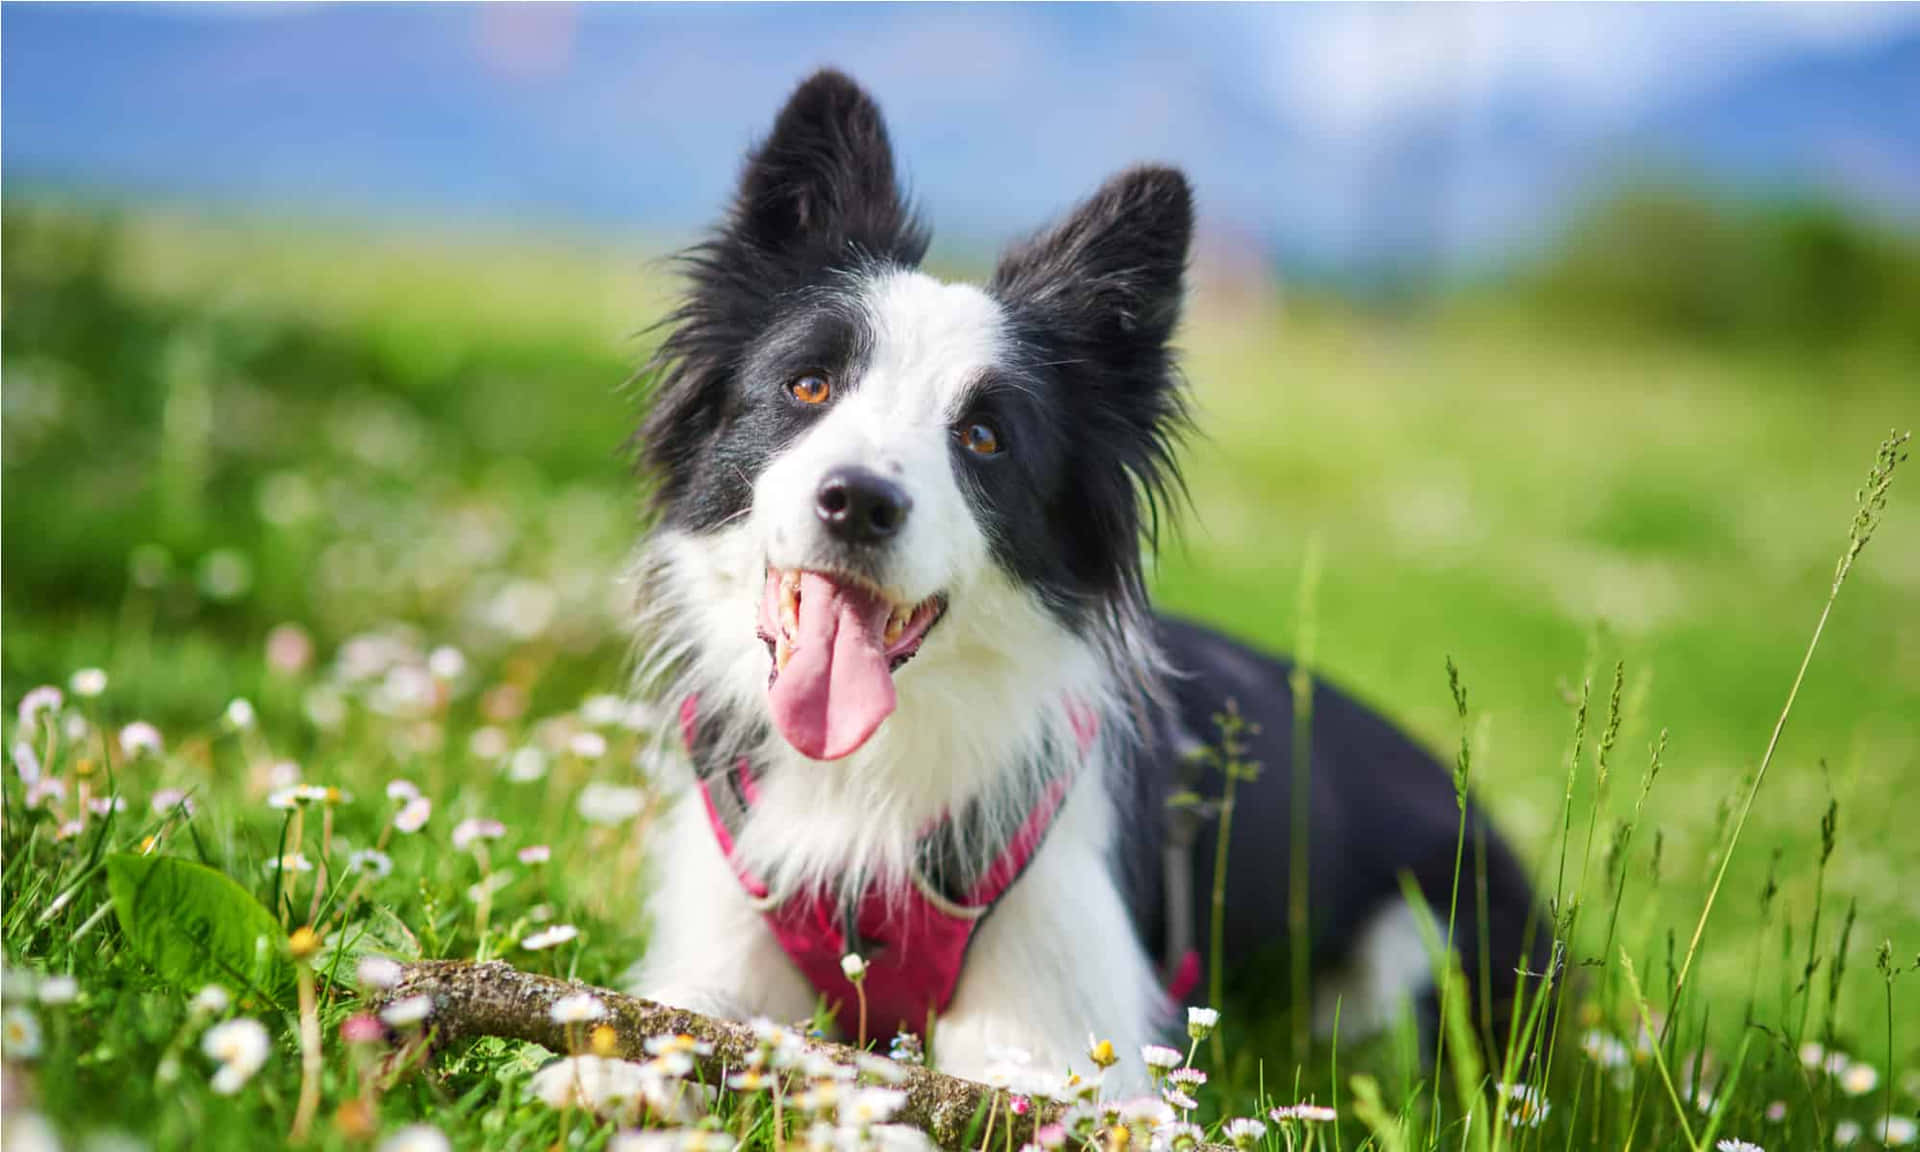 A gorgeous Border Collie enjoying some playtime in the great outdoors.